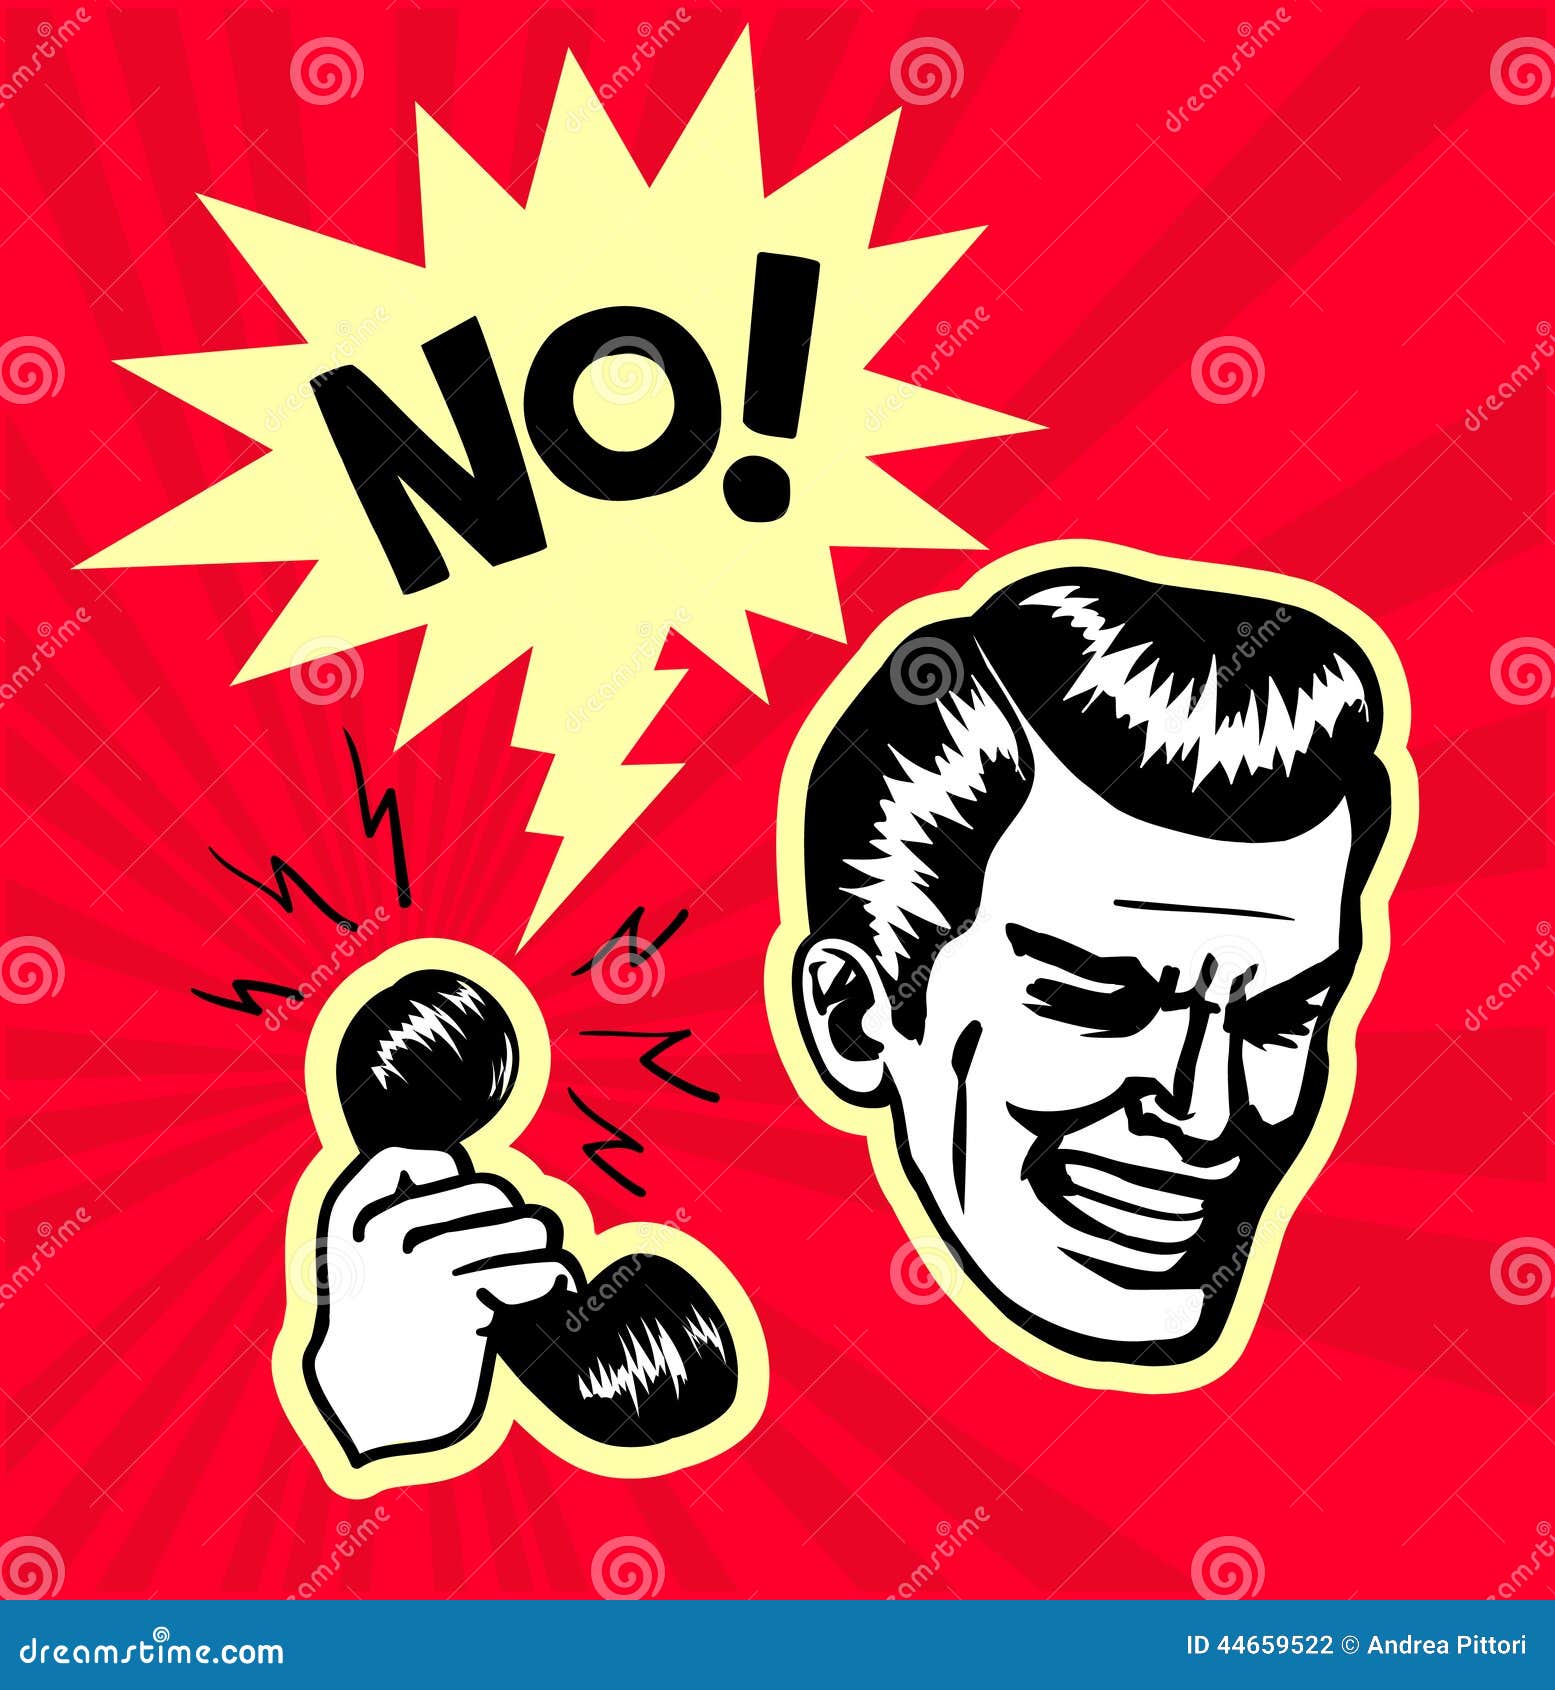 retro vintage clipart: point-blank rejection, annoying telemarketing call center clerk gets an emphatic no